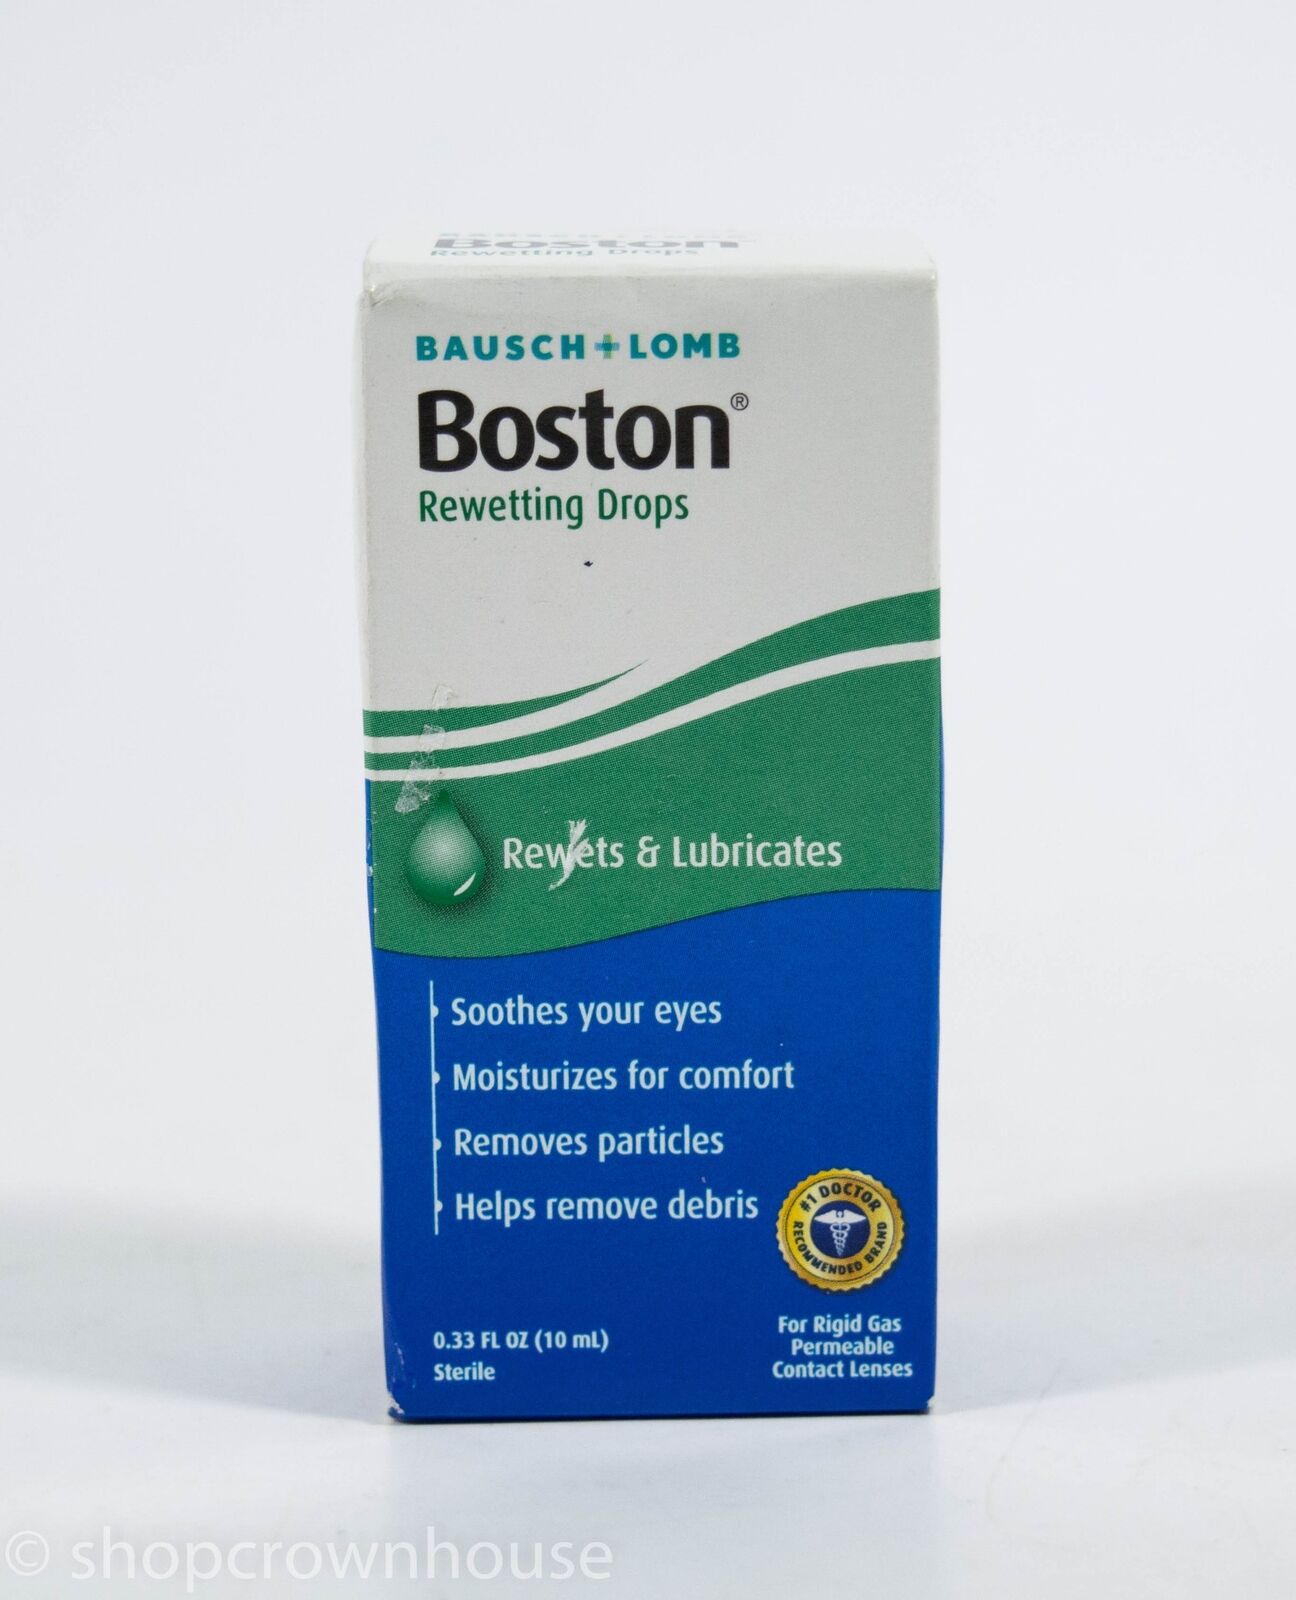 1 Bausch + Lomb Boston Rewetting Drops - Rewets And Lubricates 10 Ml 07/01/2023